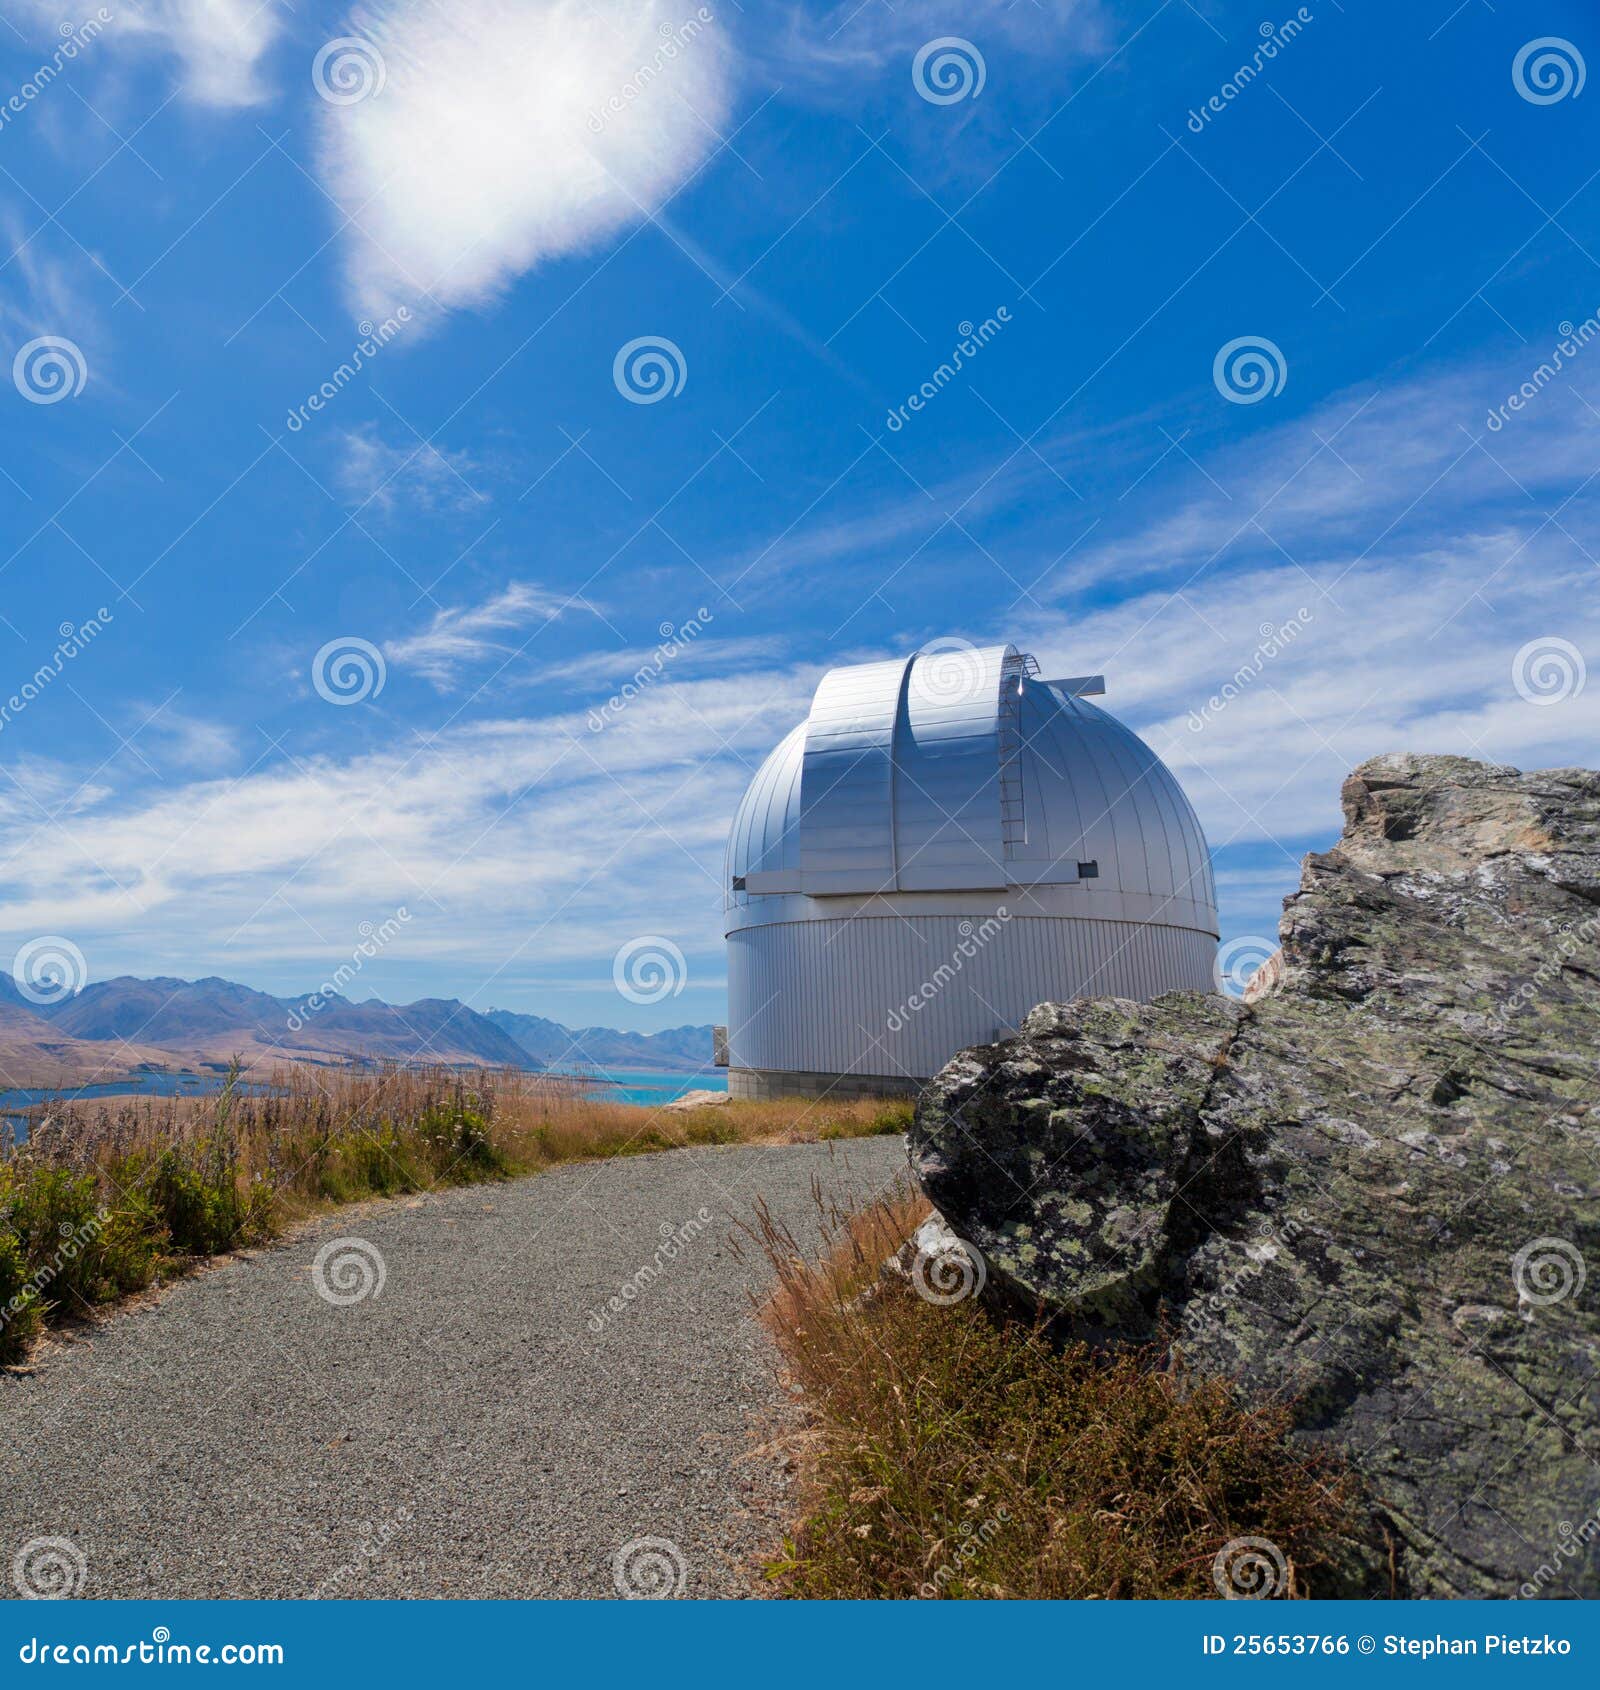 domed astronomy observatory on mountain top